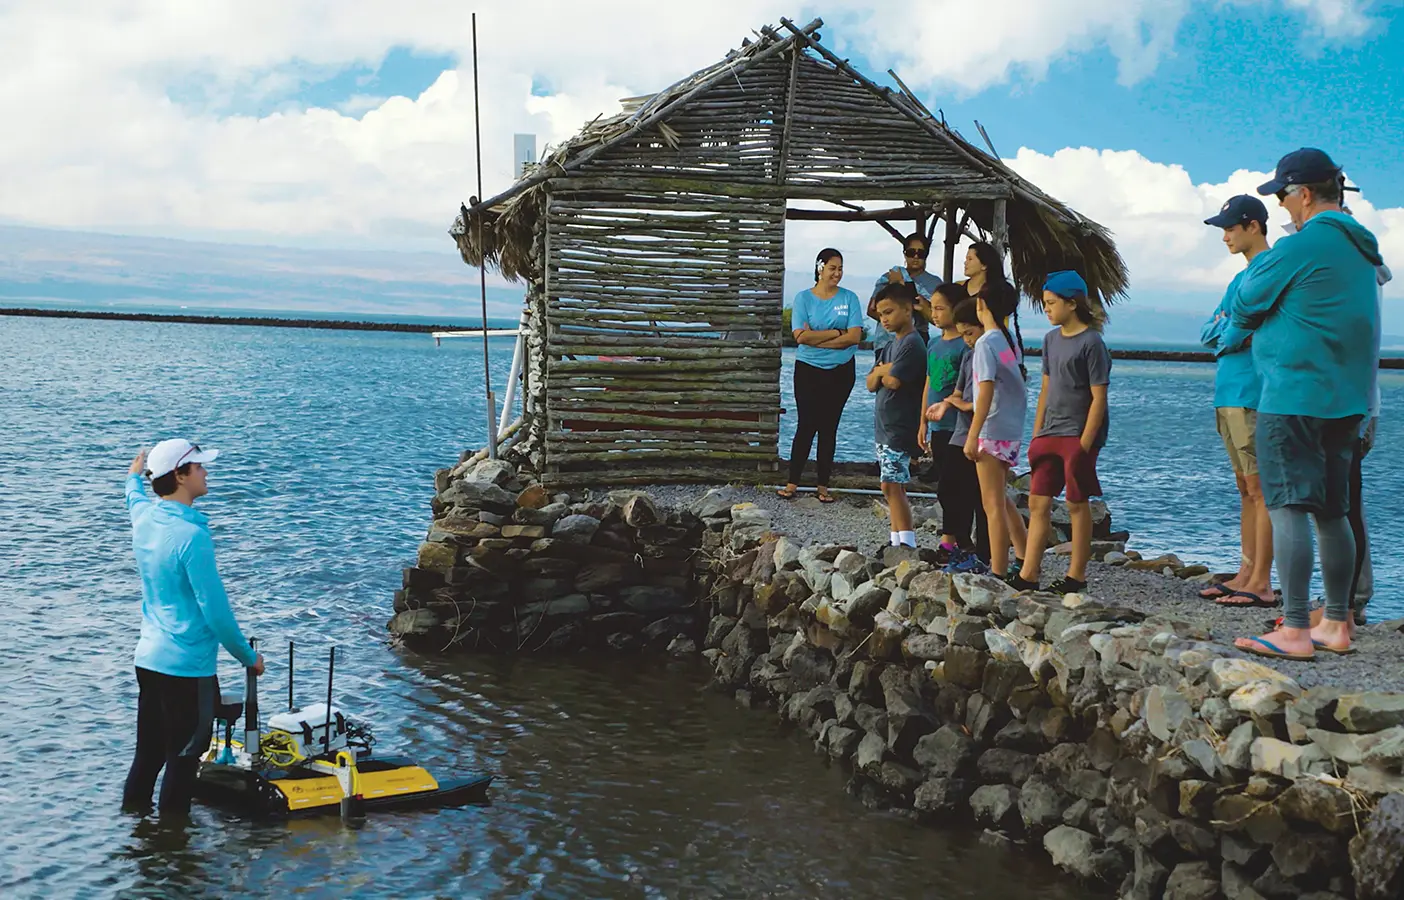 At a dock on a fishpond in Molokai, Hawaii, a BYU student explains an autonomous water drone to a group of younger students.